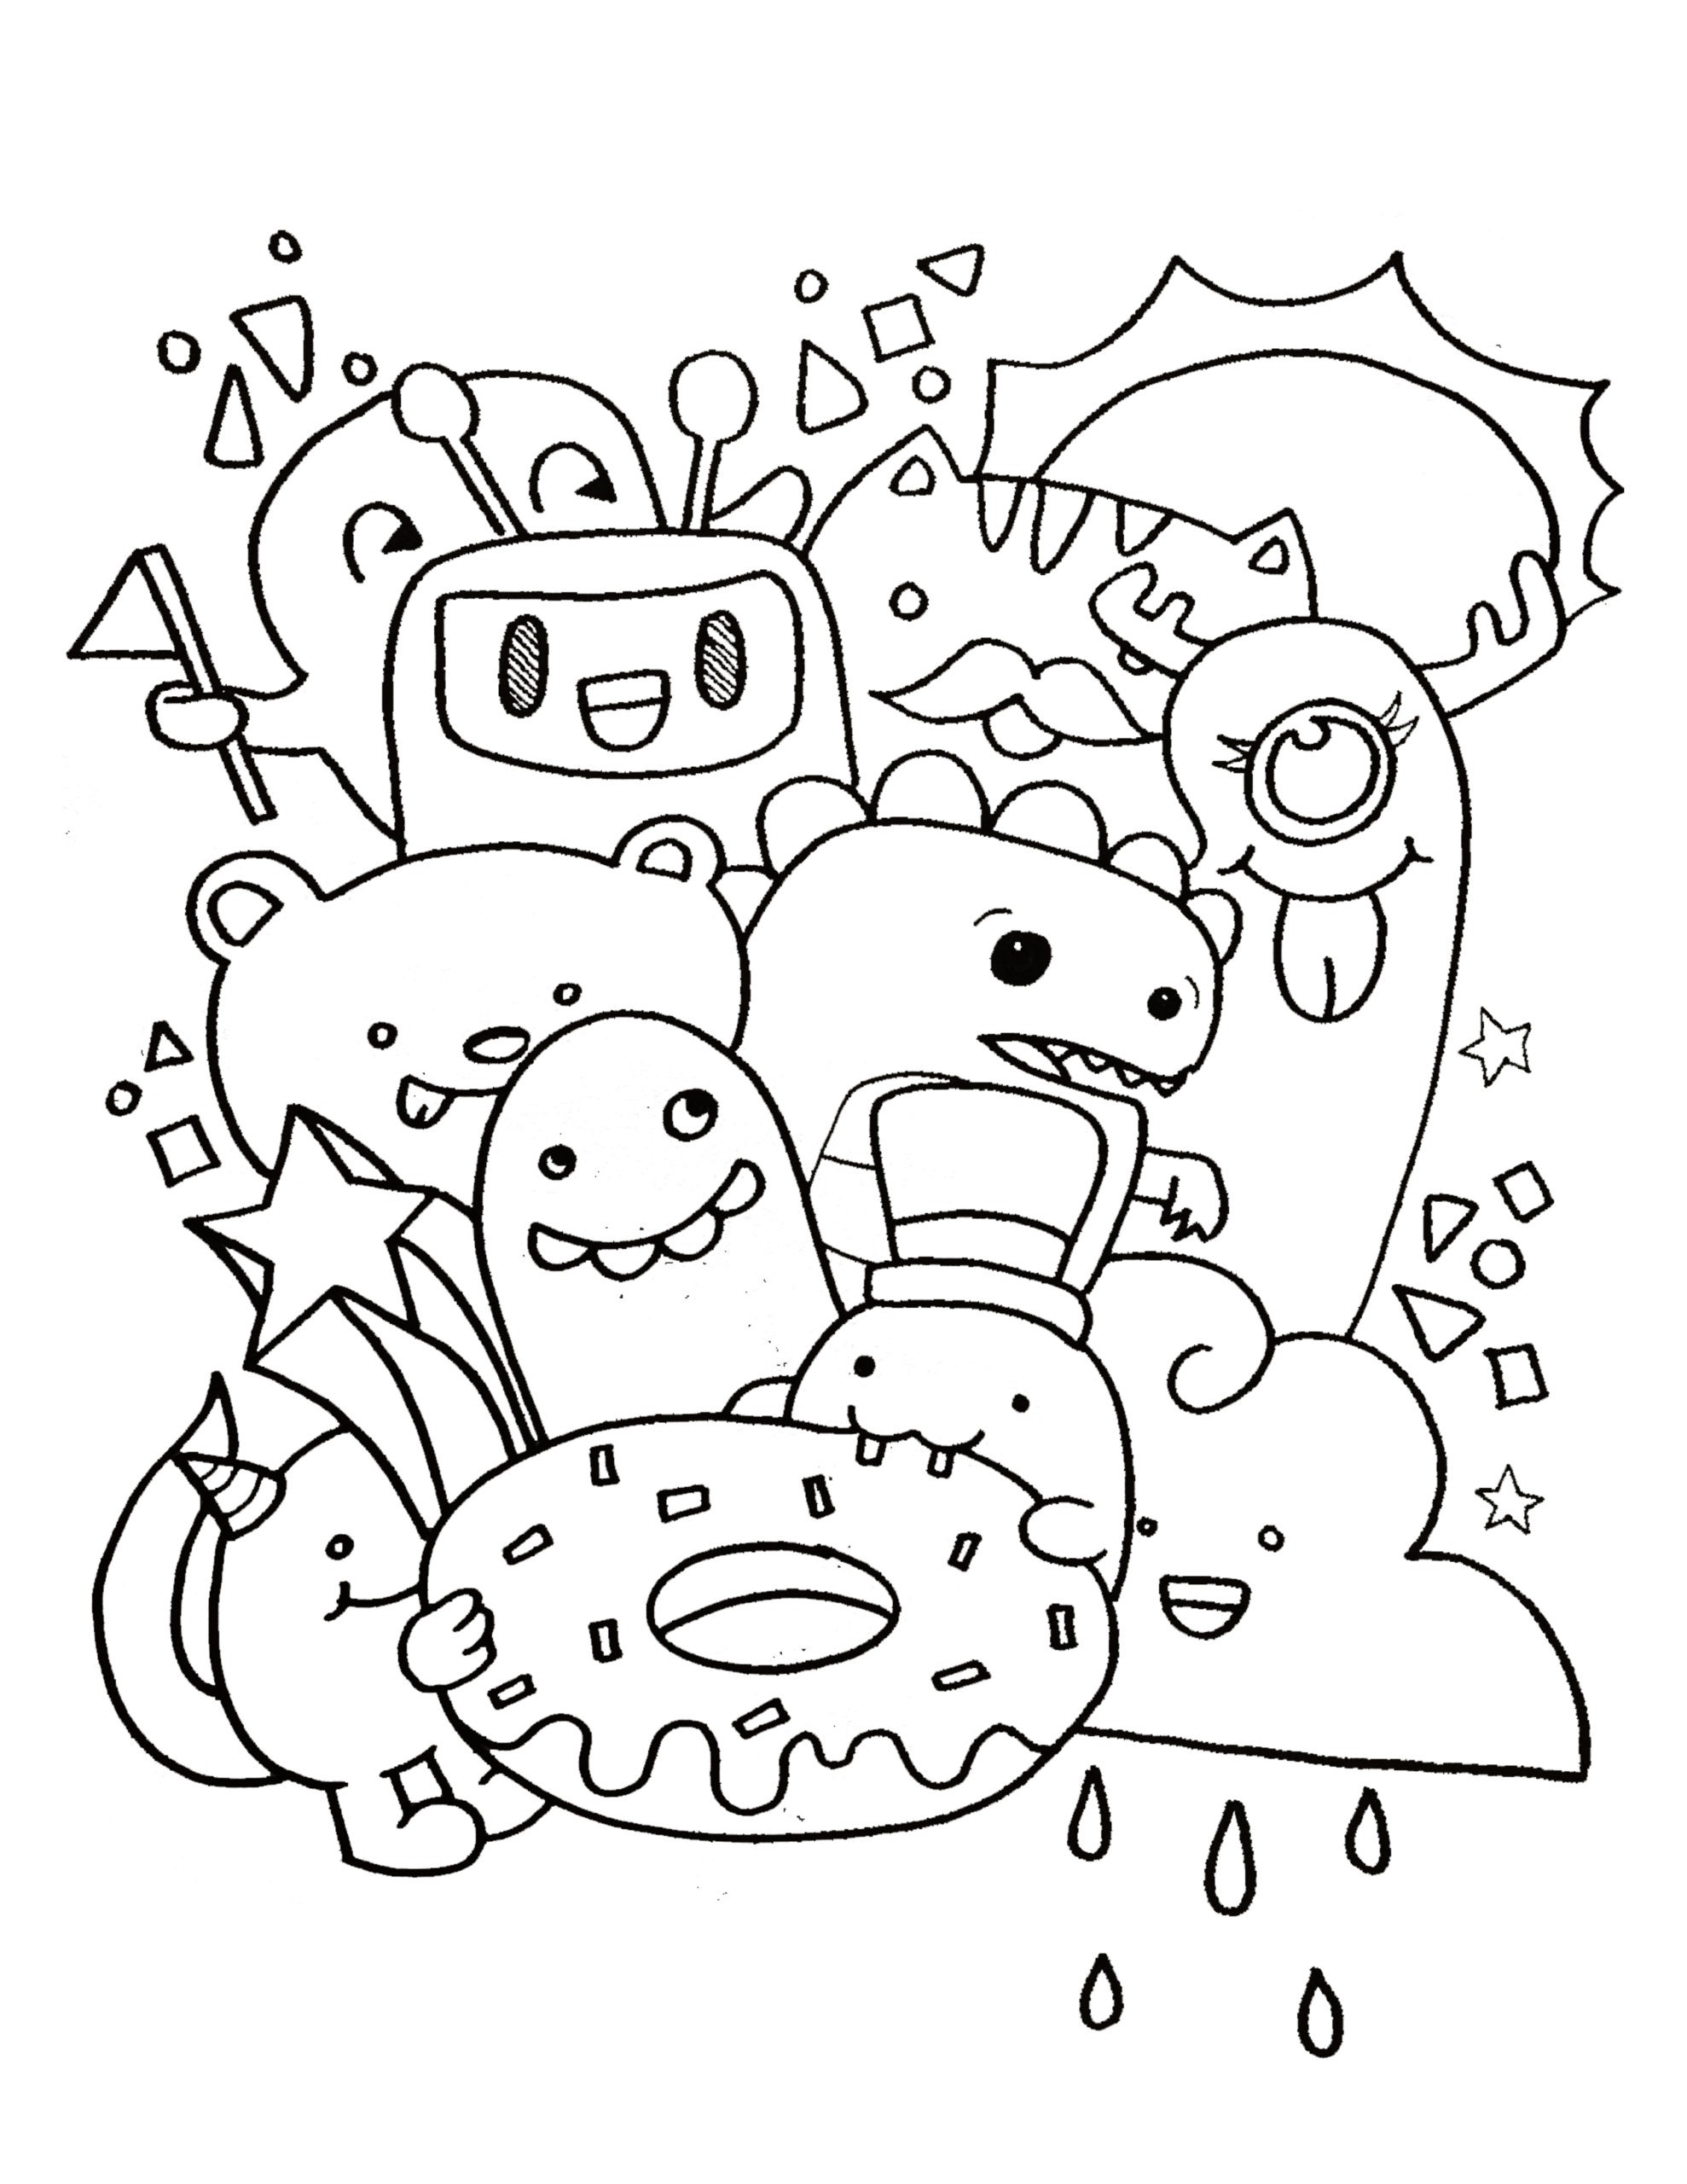 Colouring Page For Kids Printable Frog Coloring Page